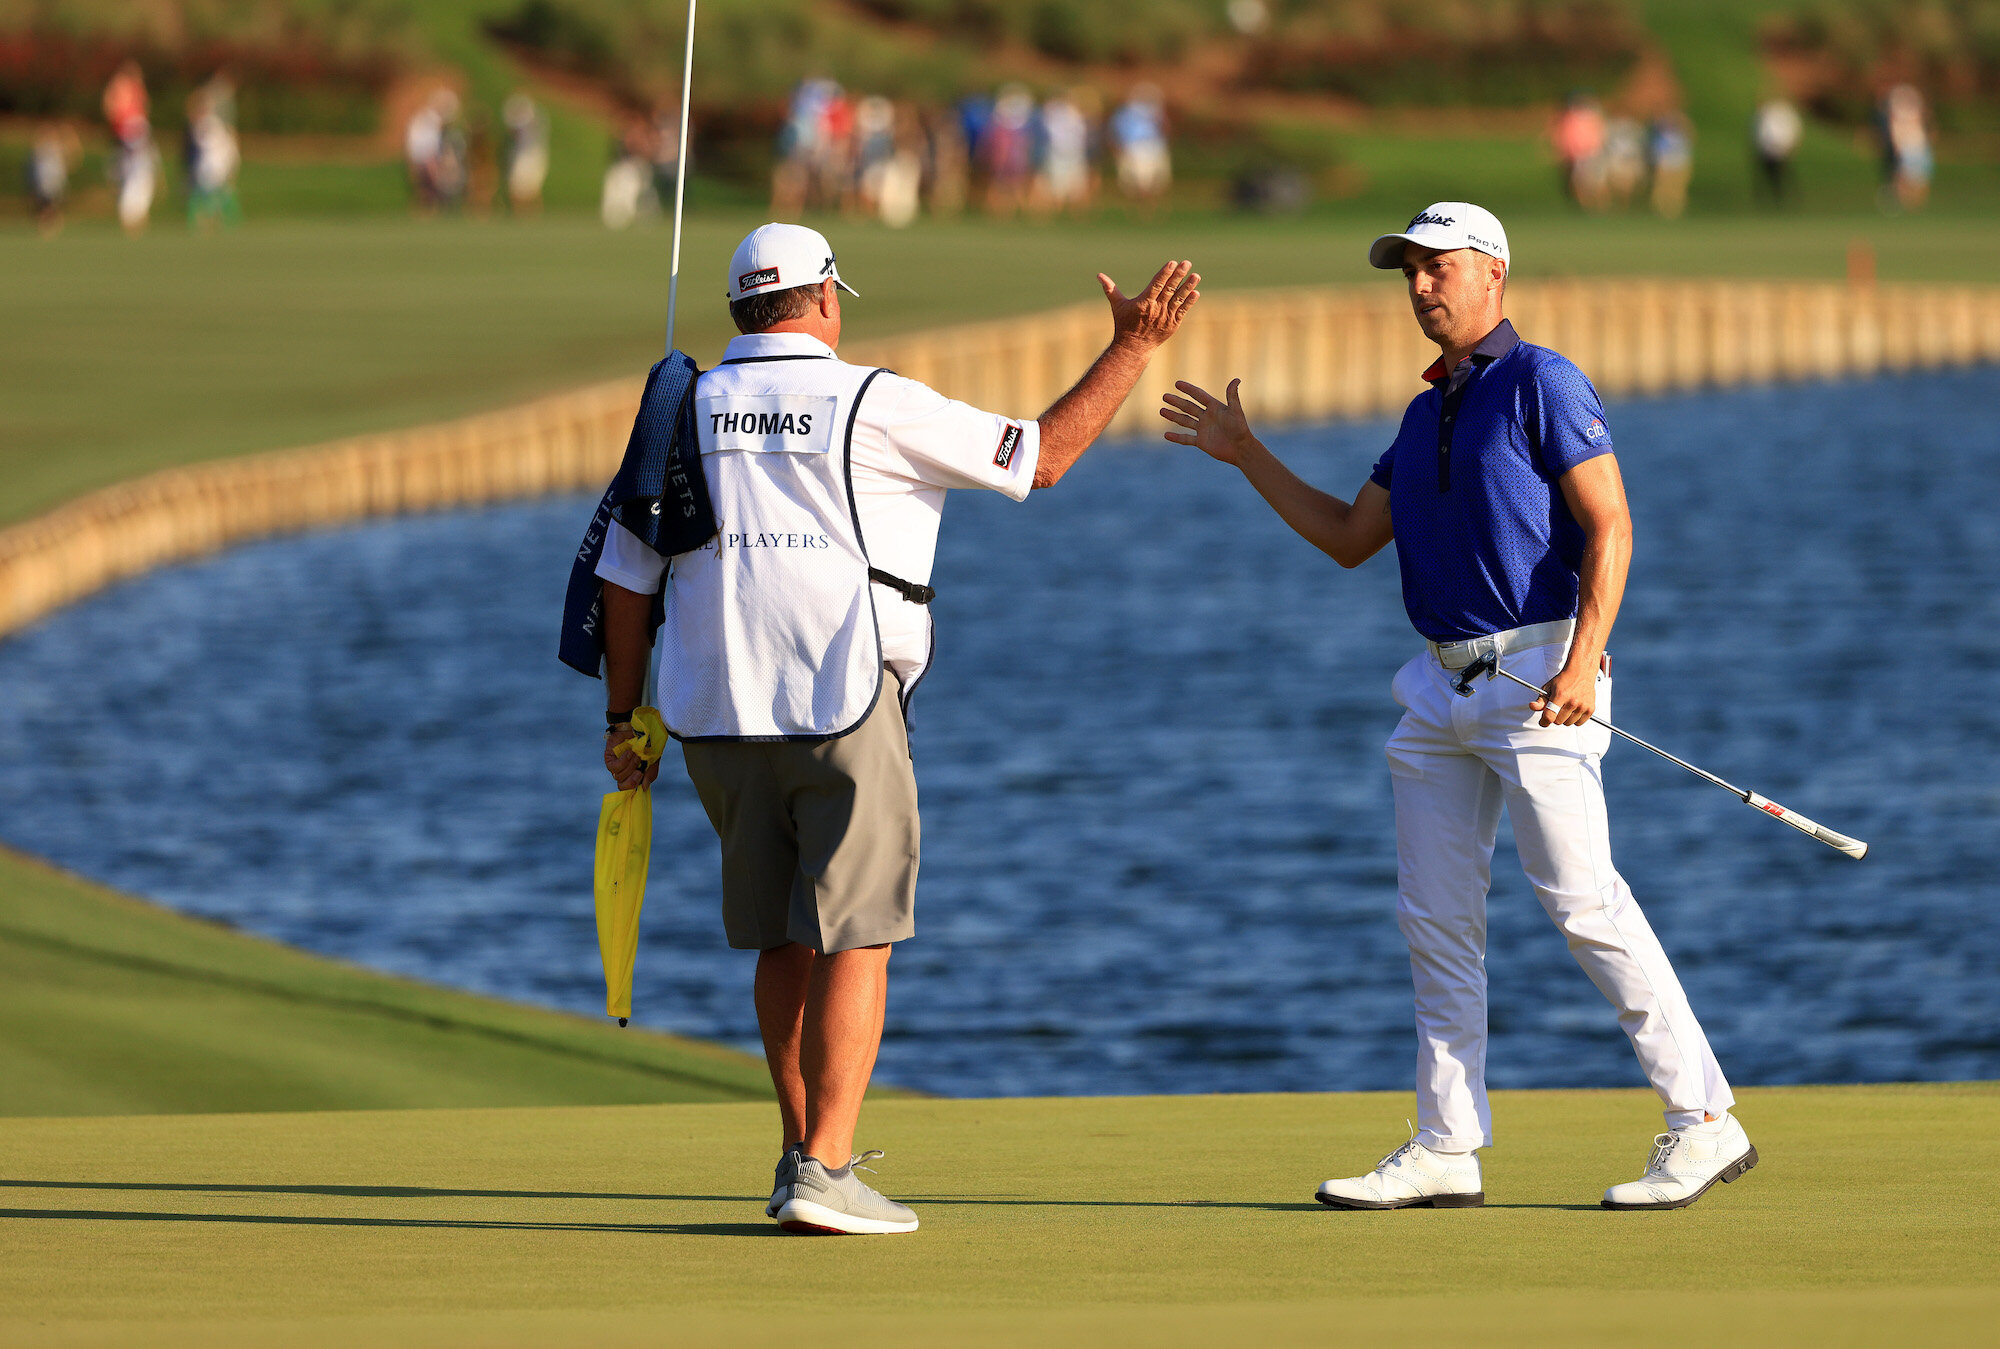  PONTE VEDRA BEACH, FLORIDA - MARCH 14: Justin Thomas of the United States celebrates with his caddie Jimmy Johnson after finishing on the 18th green on his way to winning during the final round of THE PLAYERS Championship on THE PLAYERS Stadium Cour